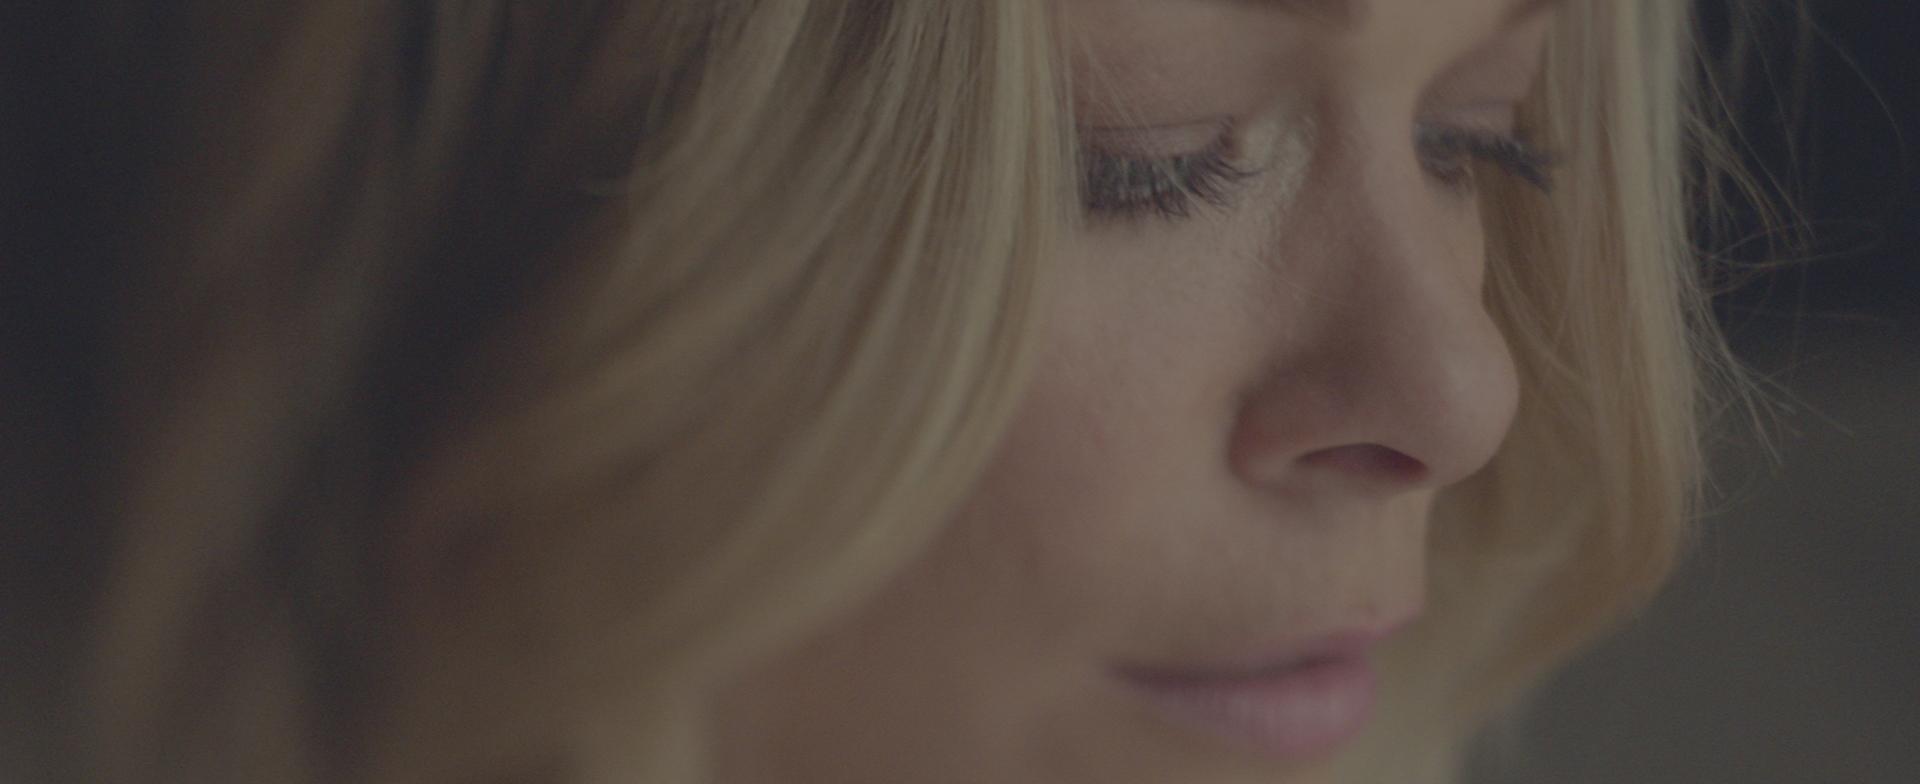 LeAnn Rimes - The Story (Official Video)